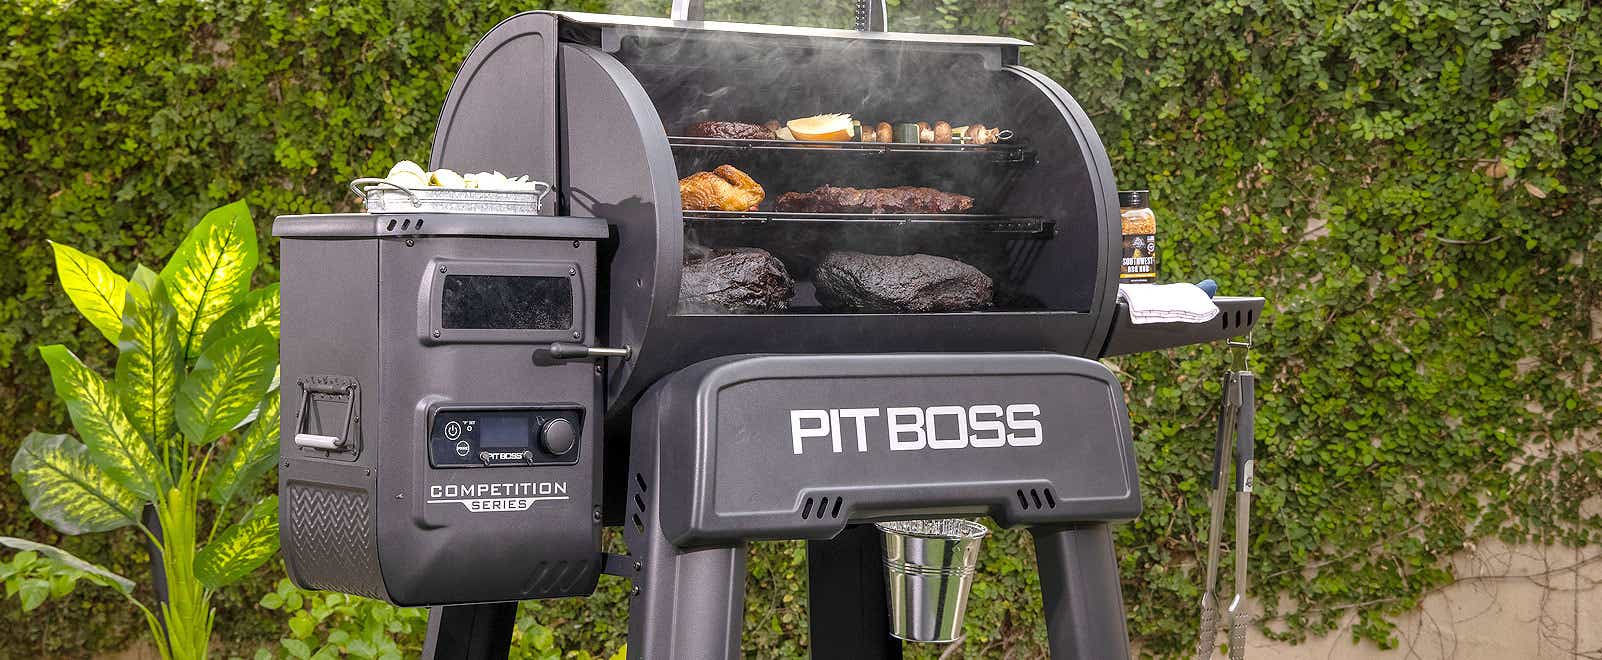 Pit Boss 1250 Competition Series Pellet Grill on display